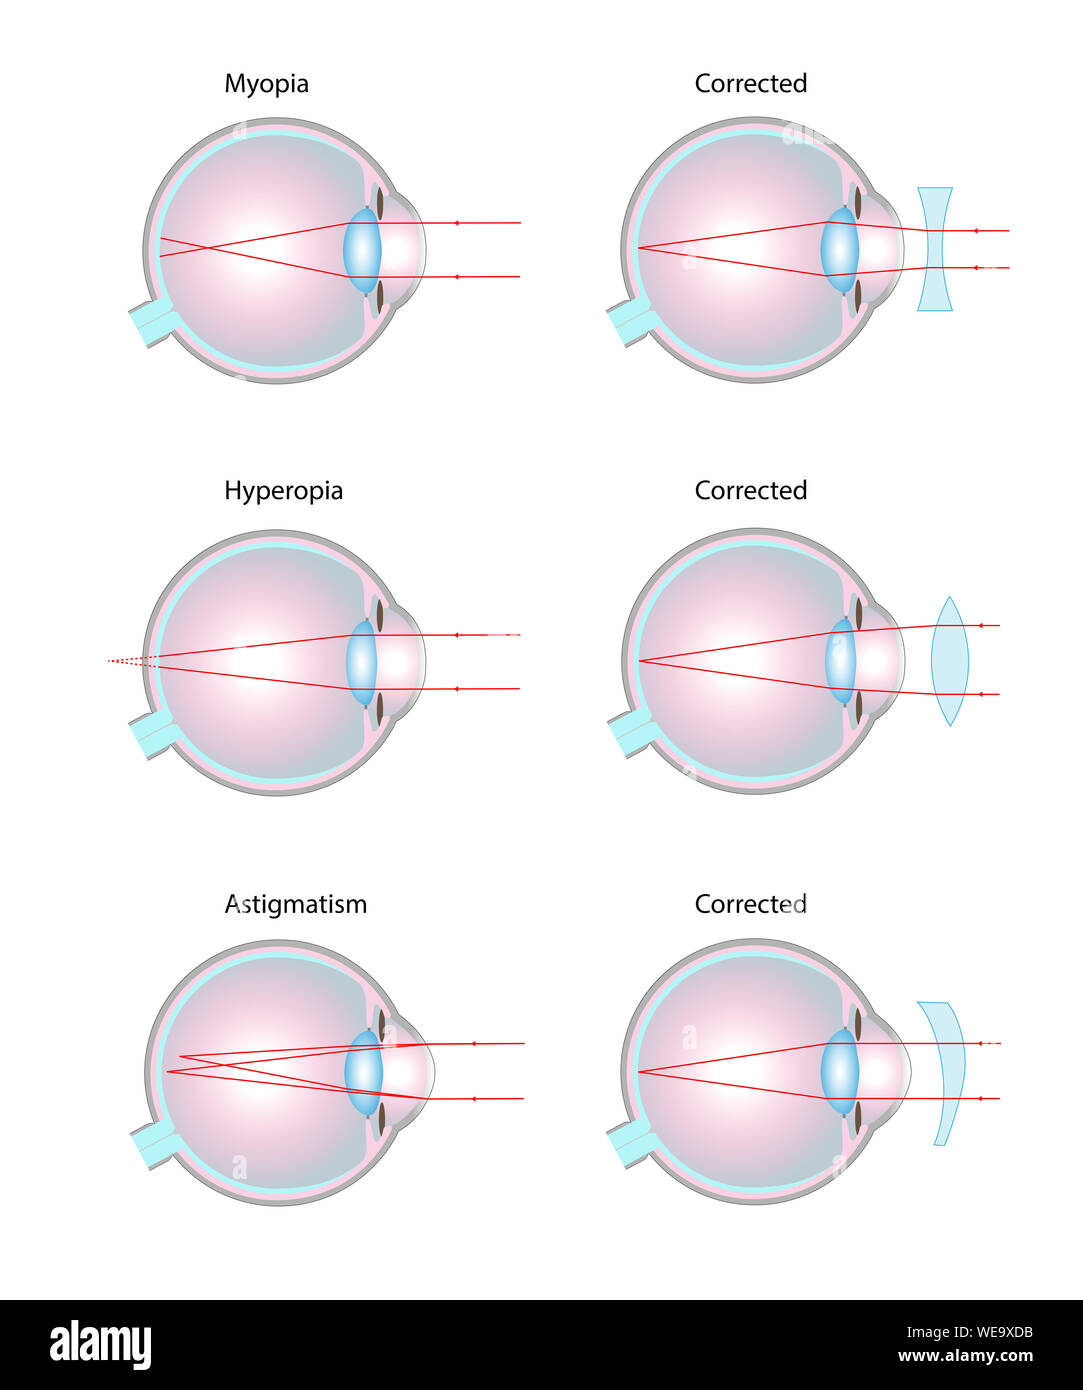 Vision disorders and corrective lenses, illustration. Short-sightedness/myopia (top), long-sightedness/hyperopia (middle), astigmatism (bottom). Stock Photo